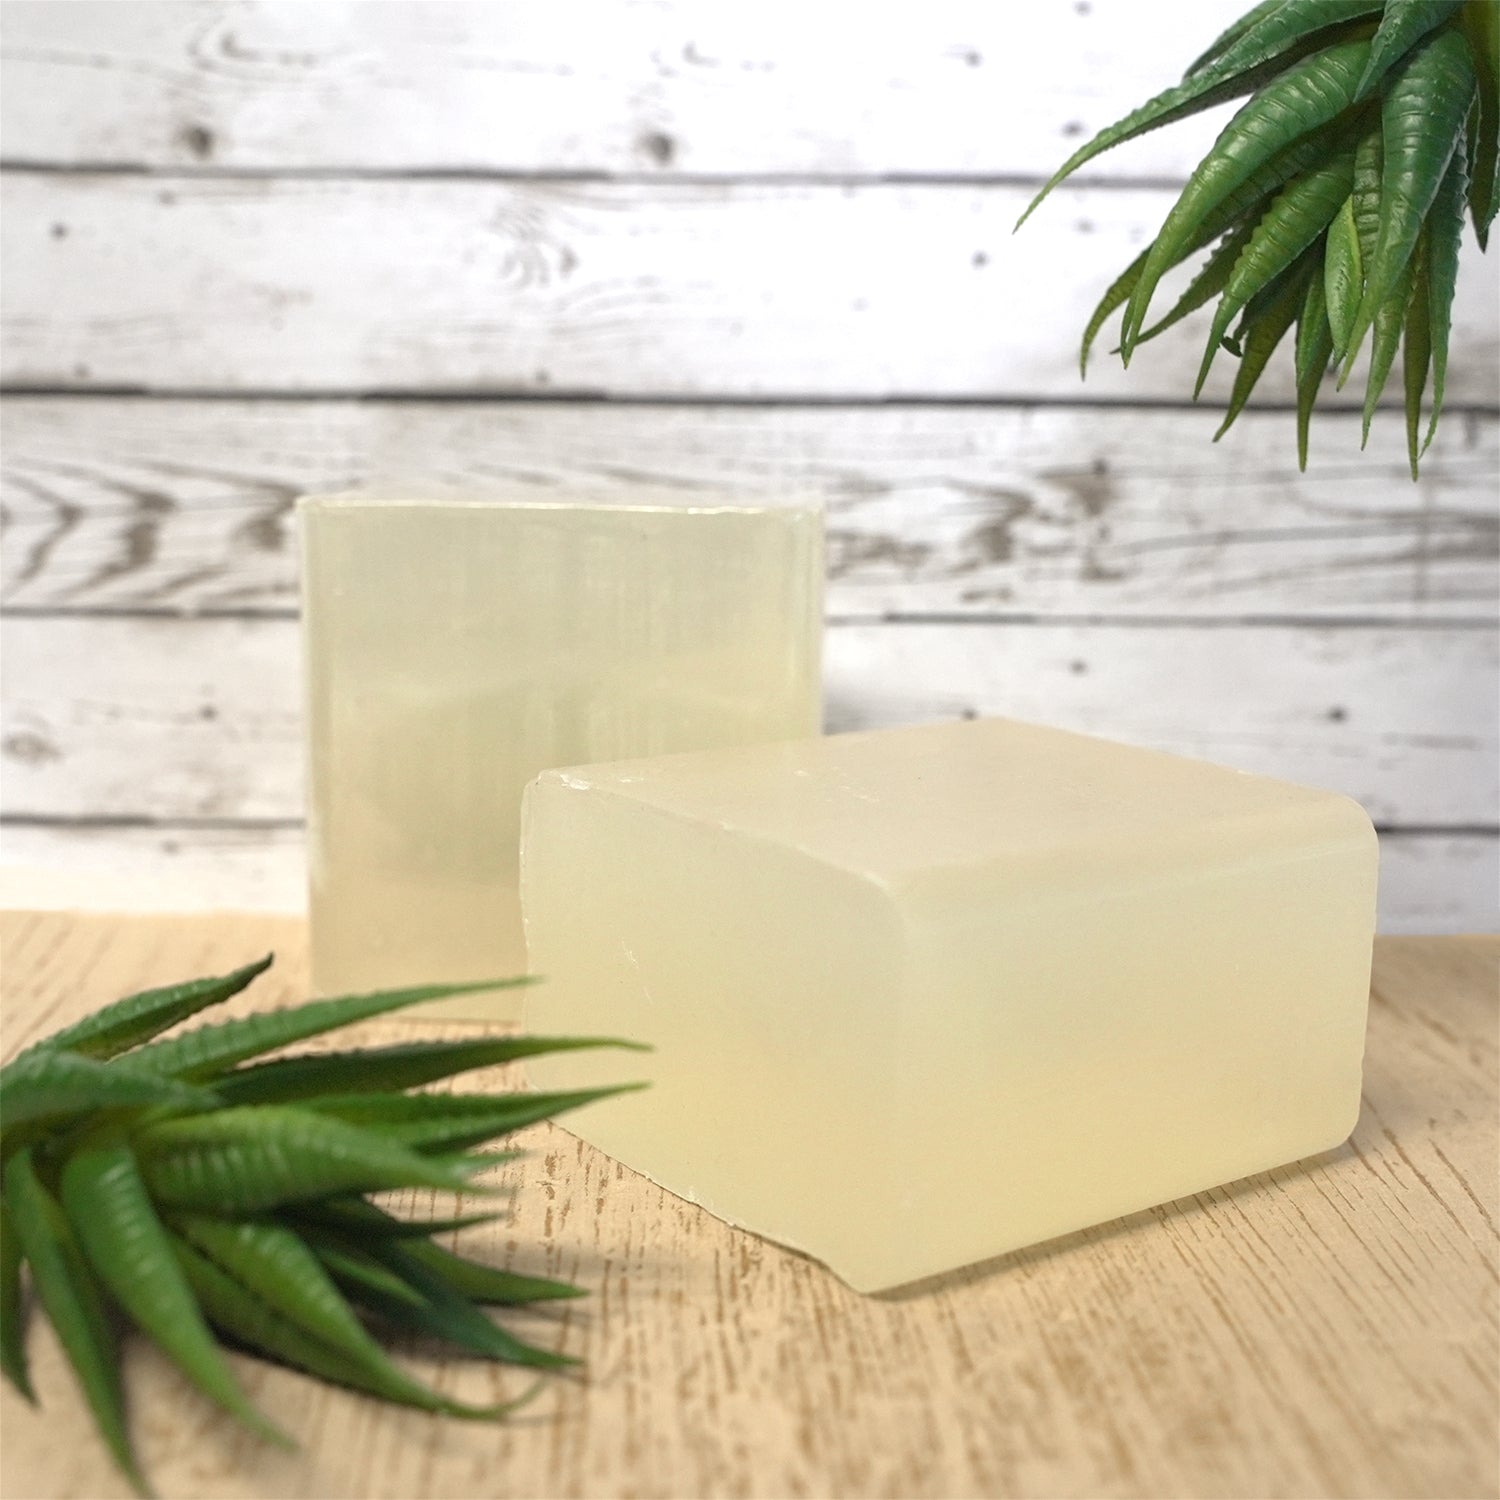 10 lbs ALOE VERA GEL MELT AND POUR Soap Base 100% All Natural Healing Clear  Green No Chemical SLS SLES Free Soy Free Luxurious Vegetable Oil Vegan  Wholesale Bulk - THE GOURMET ROSE